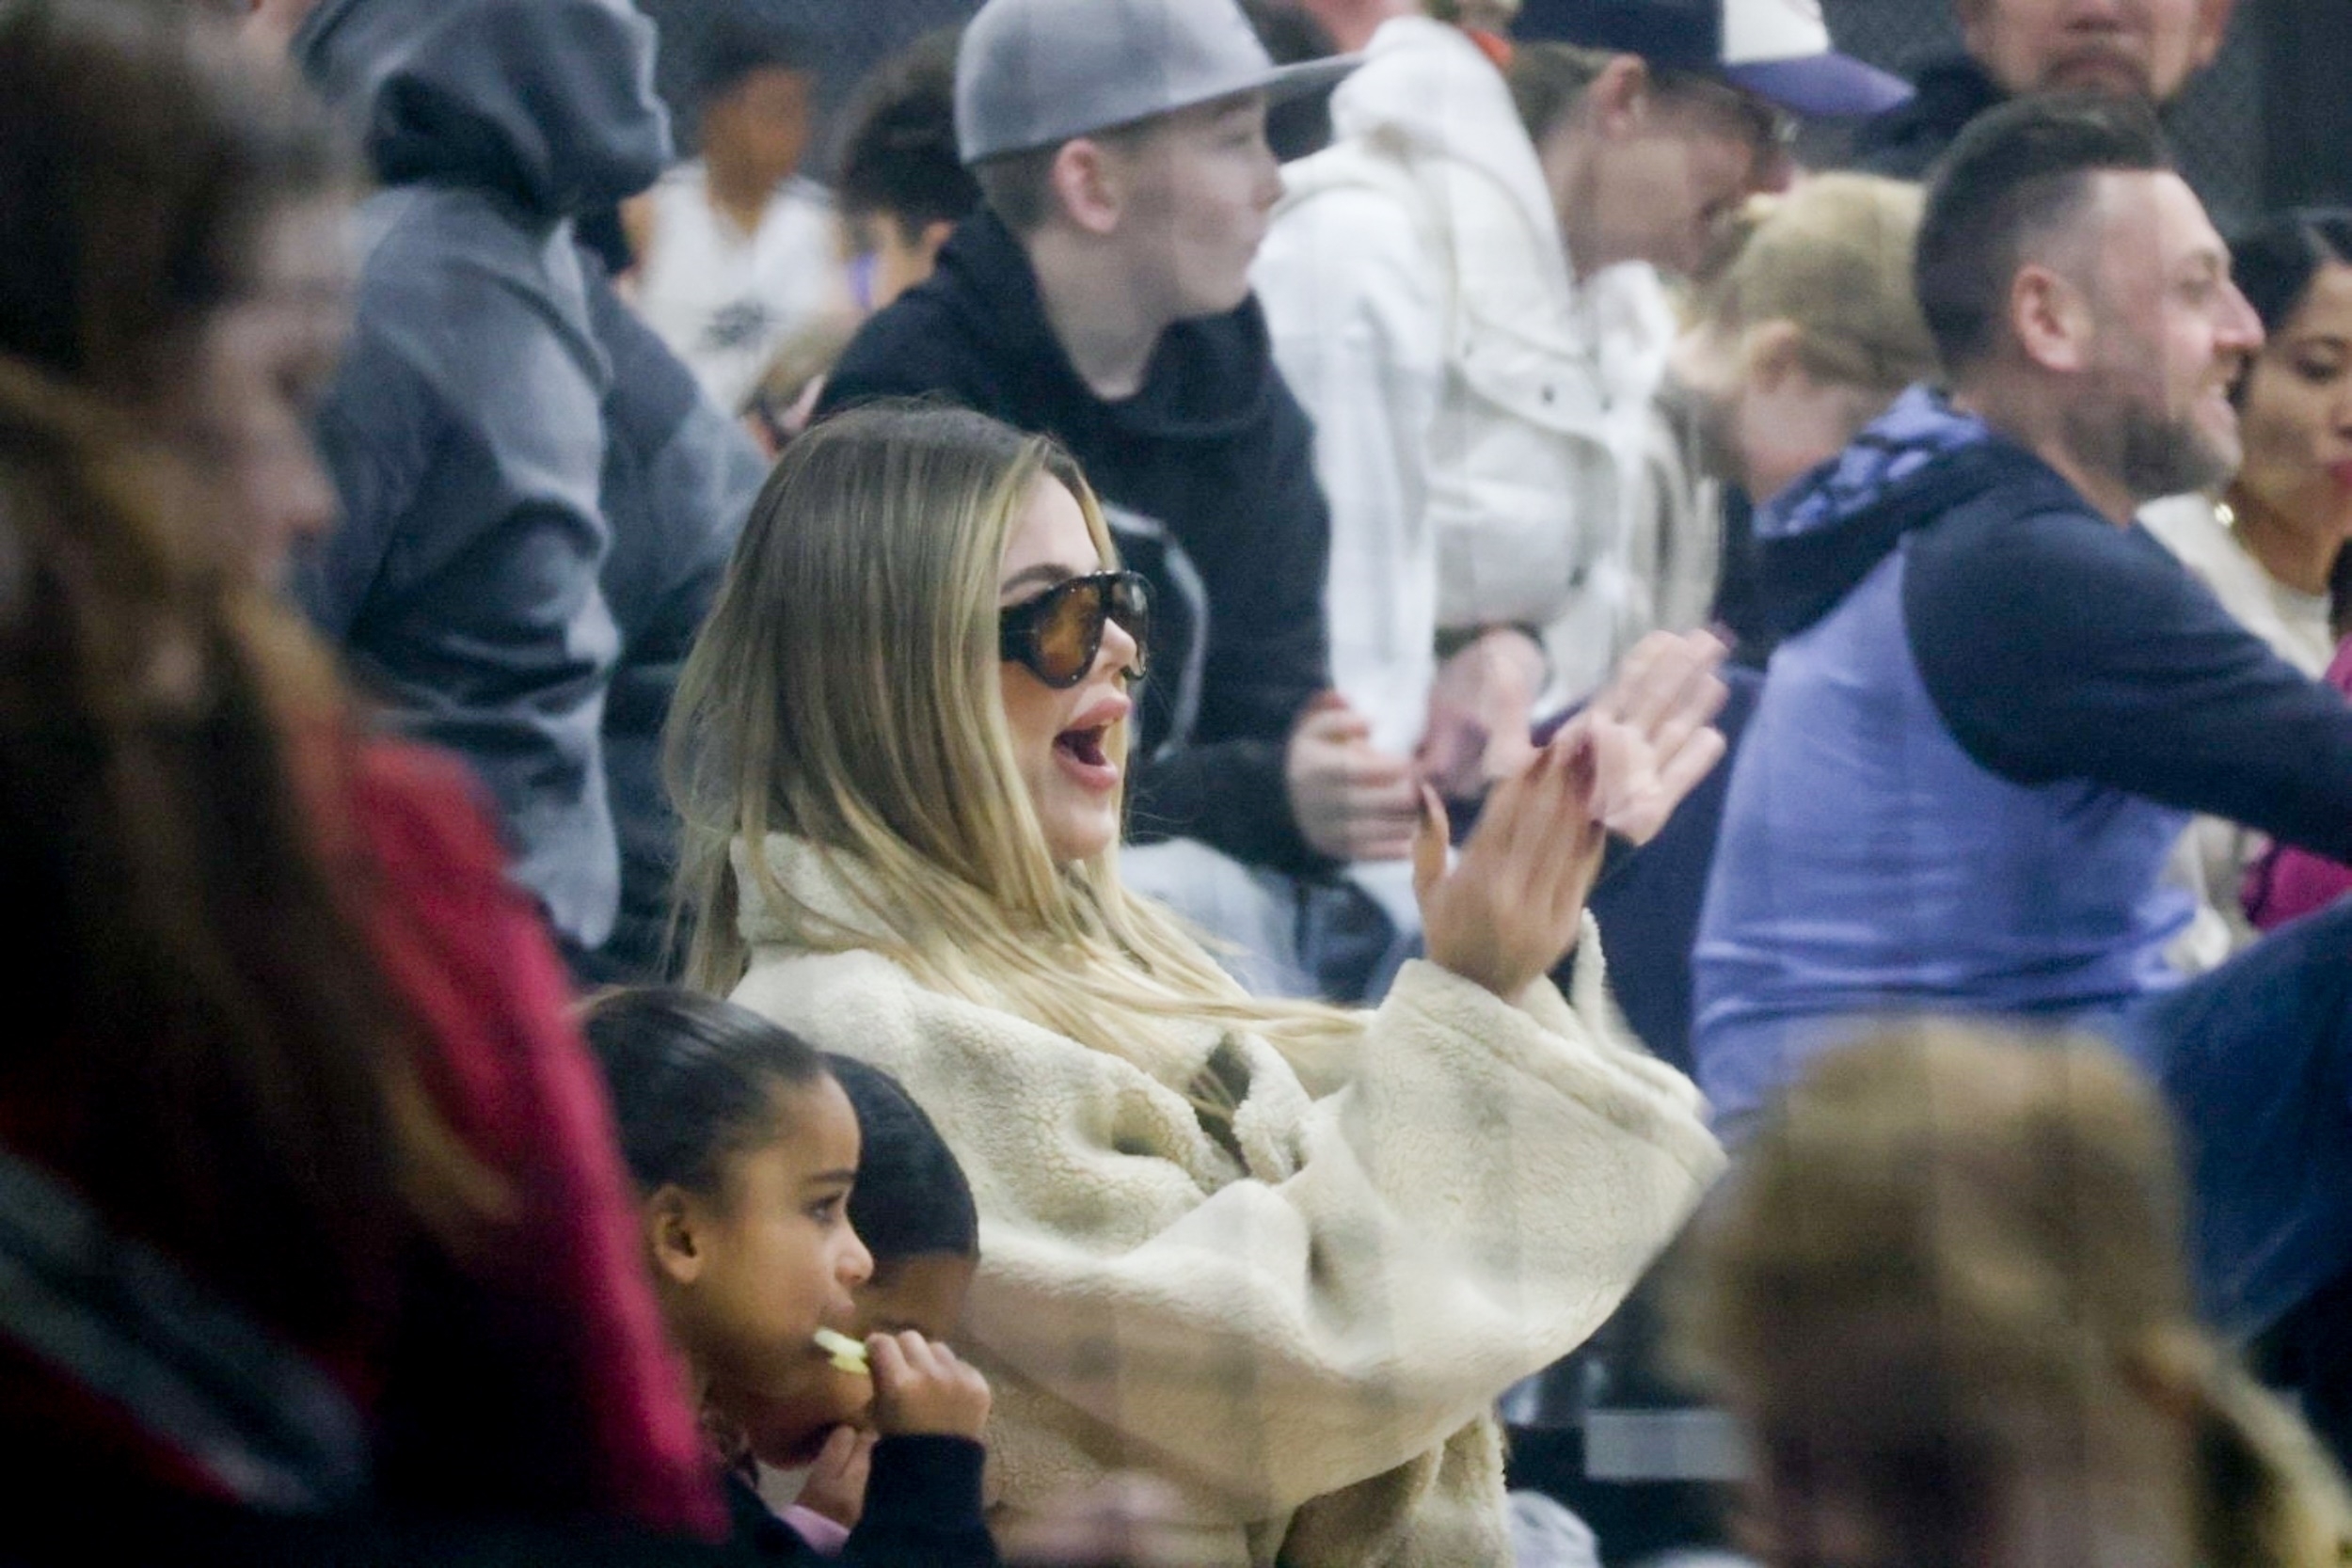 Khloe cheered from the stands with daughters True and Dream